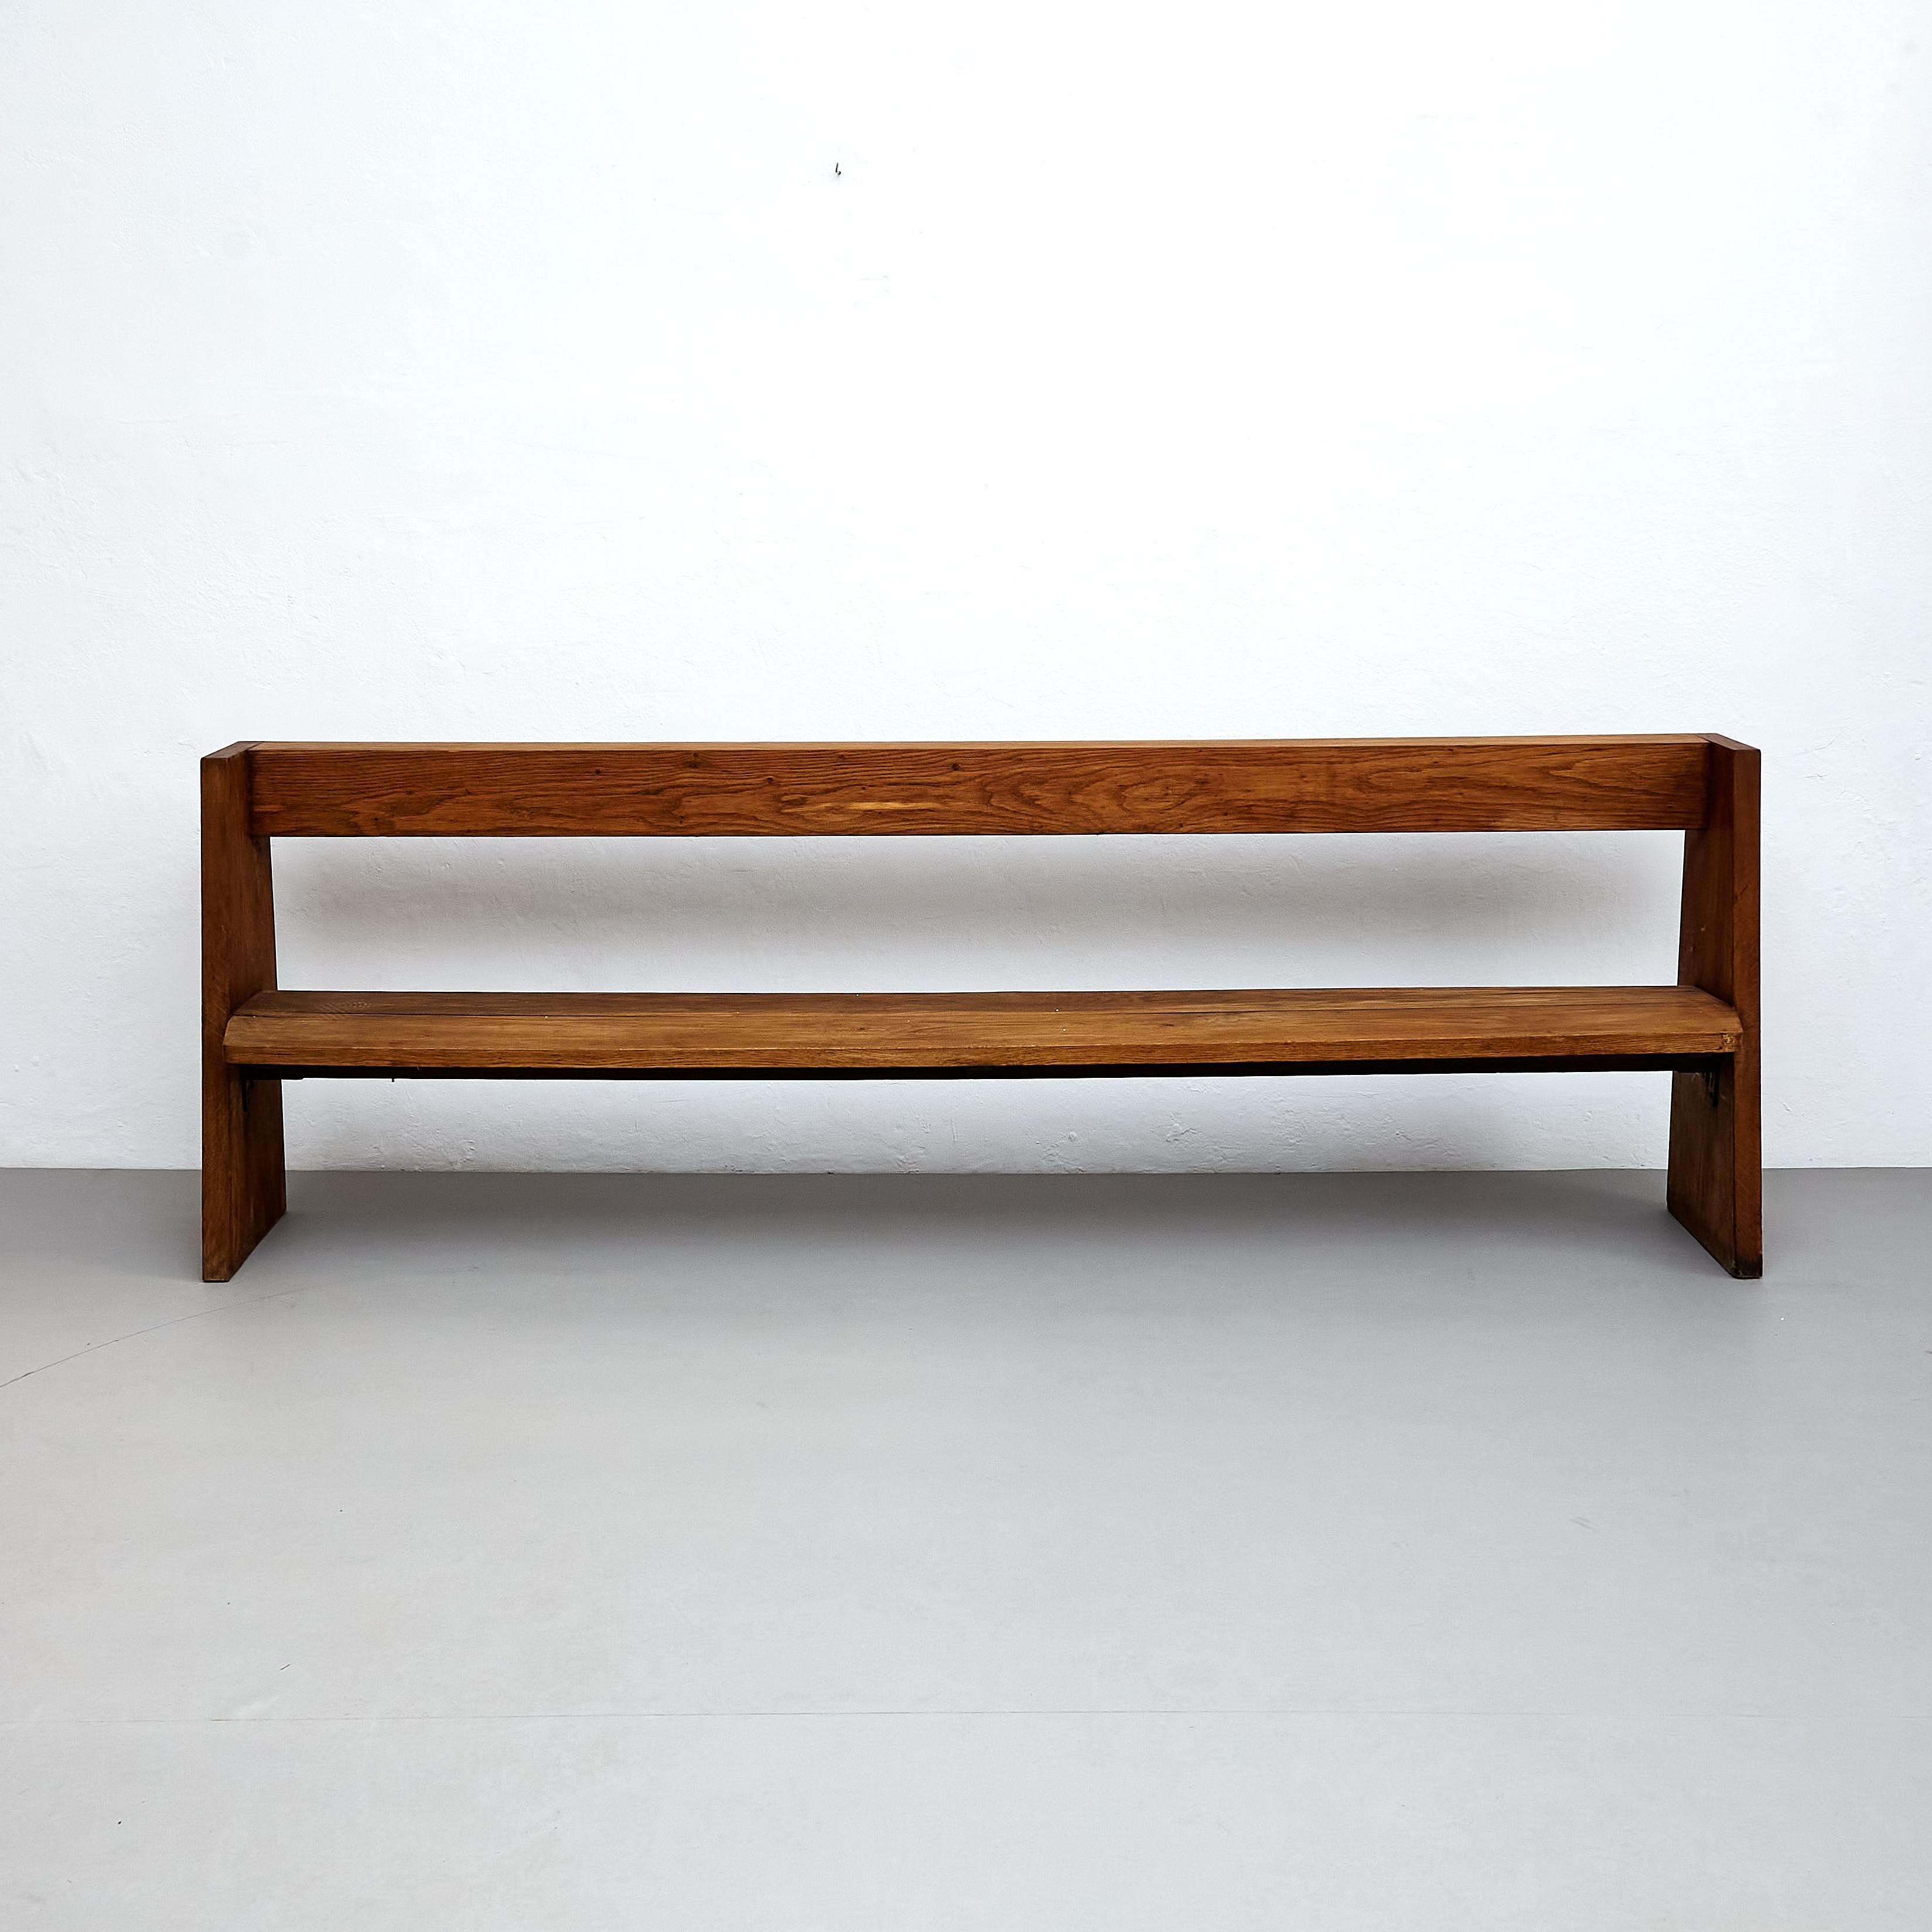 Mid-Century Modern large Rationalist wood bench.

Manufactured in France, circa 1960.

In original condition with minor wear consistent of age and use, preserving a beautiful patina.

Materials: 
Wood

Dimensions: 
D 44.5cm x W 250 cm x H